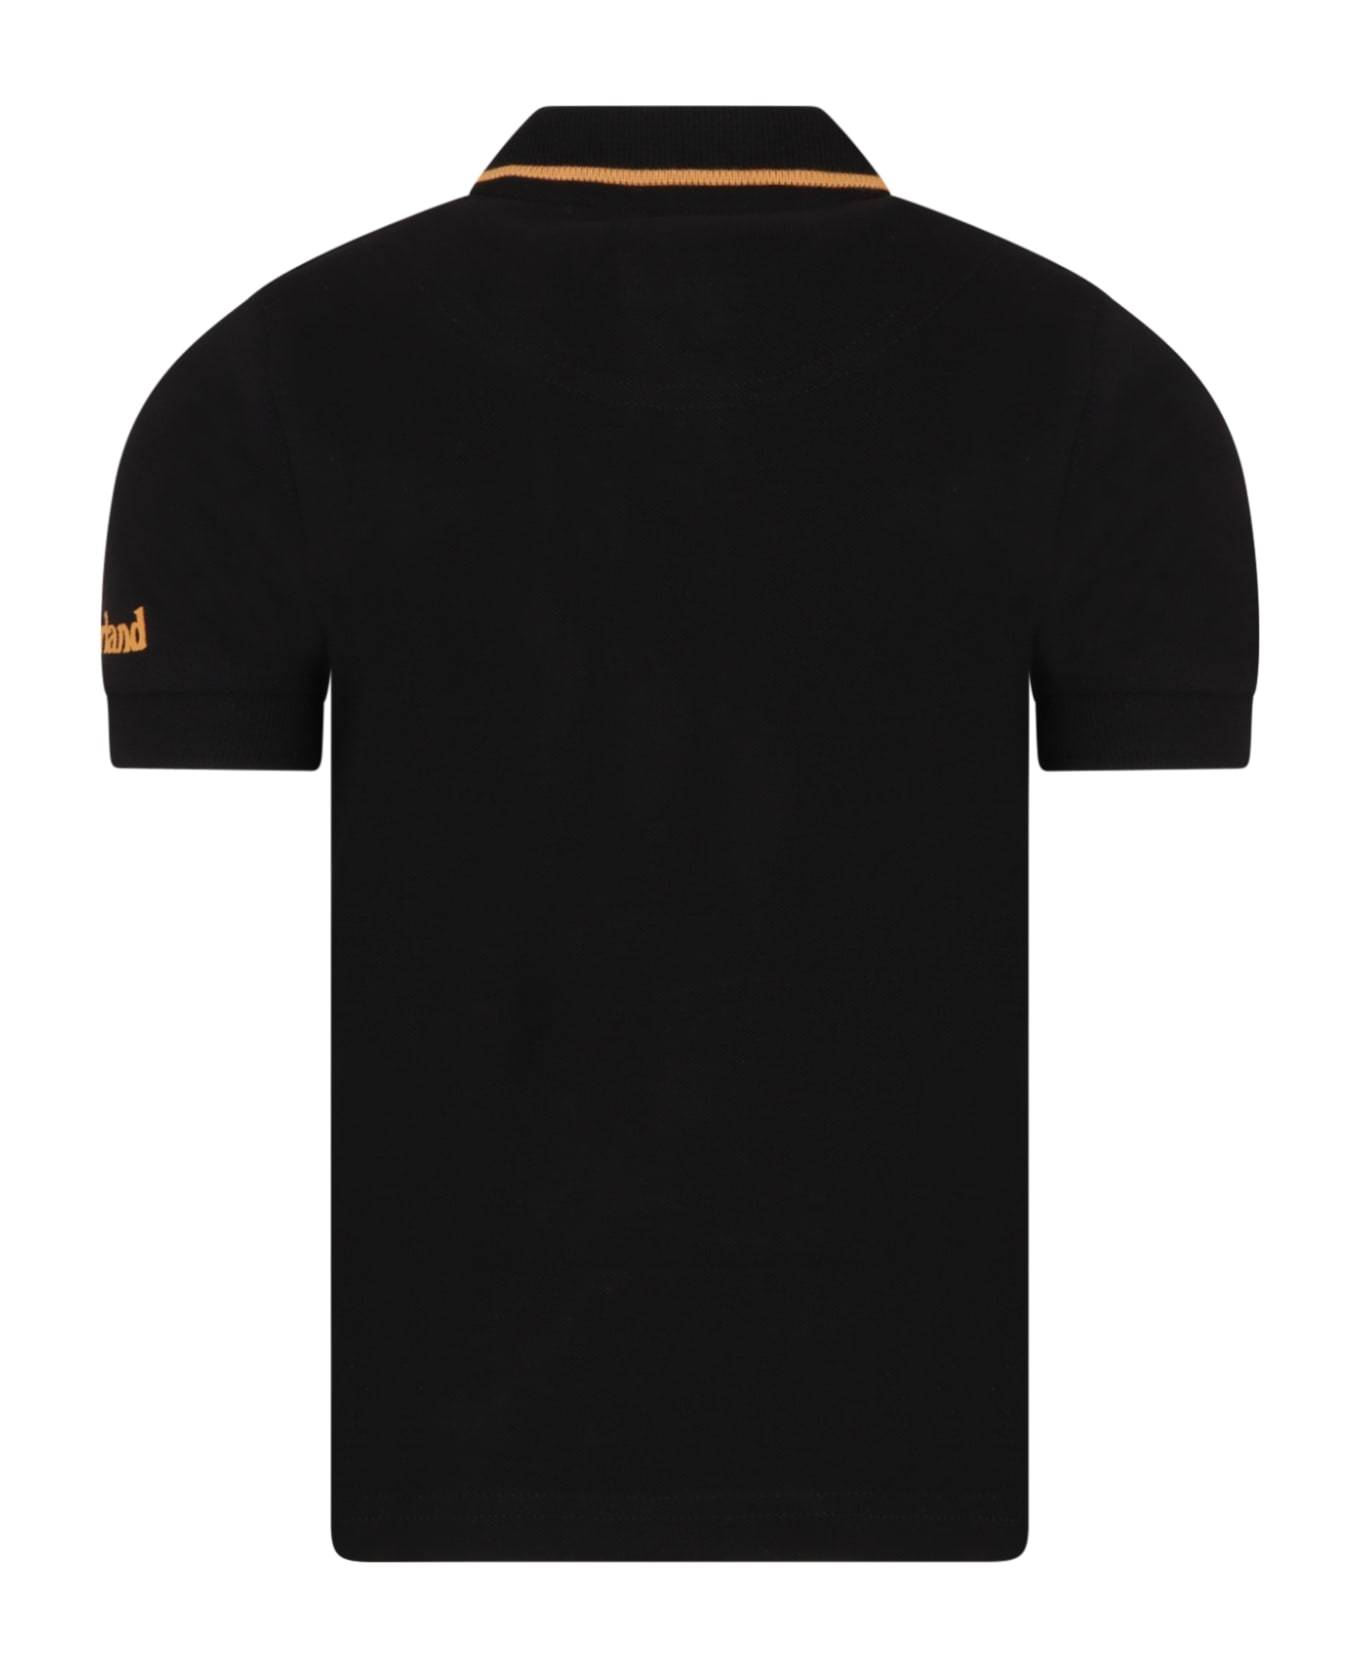 Timberland Black Polo Shirt For Boy With Patch Logo - Black